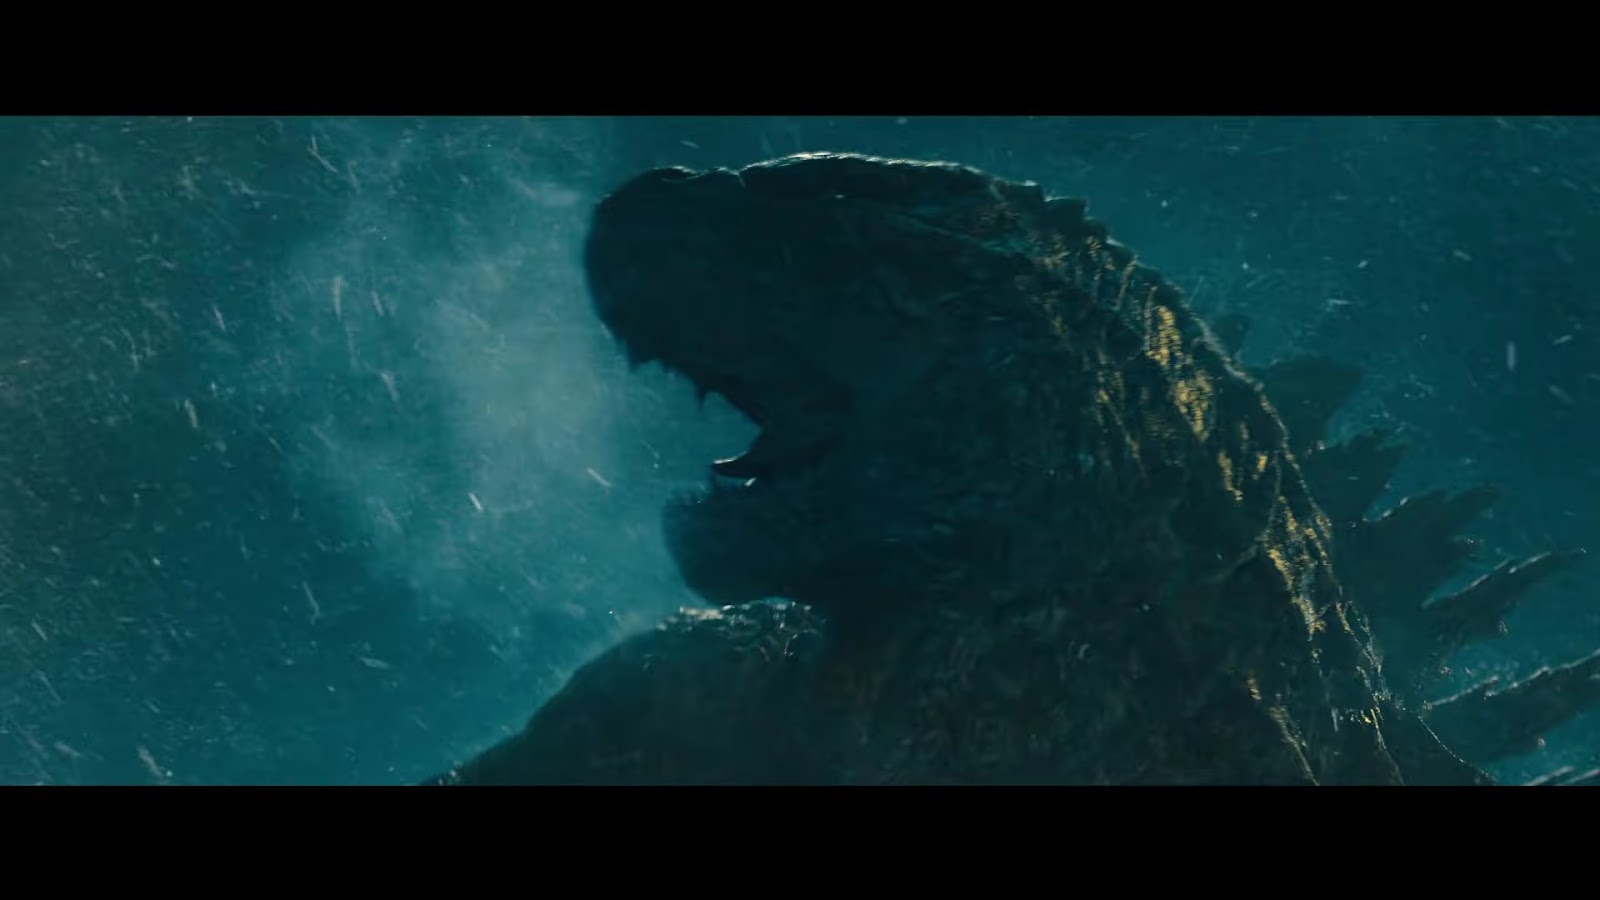 Part of Godzilla King of the Monsters movie